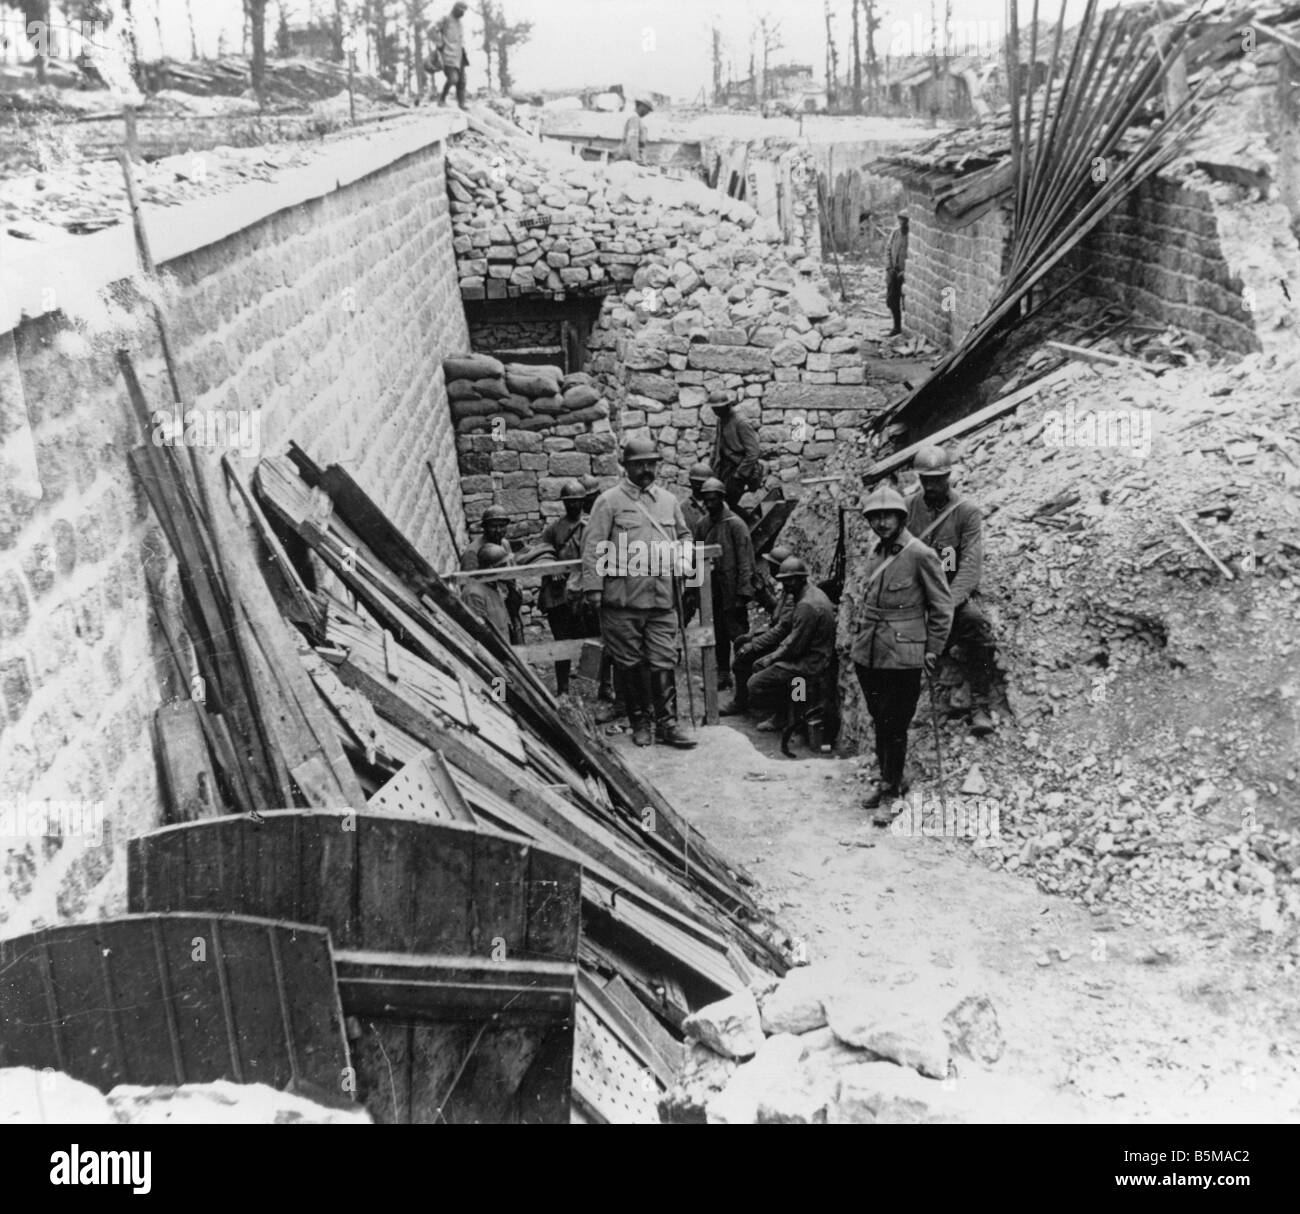 2 G55 W1 1916 3 French position World War I 1916 History World War I Western Front A French position in a village French soldier Stock Photo